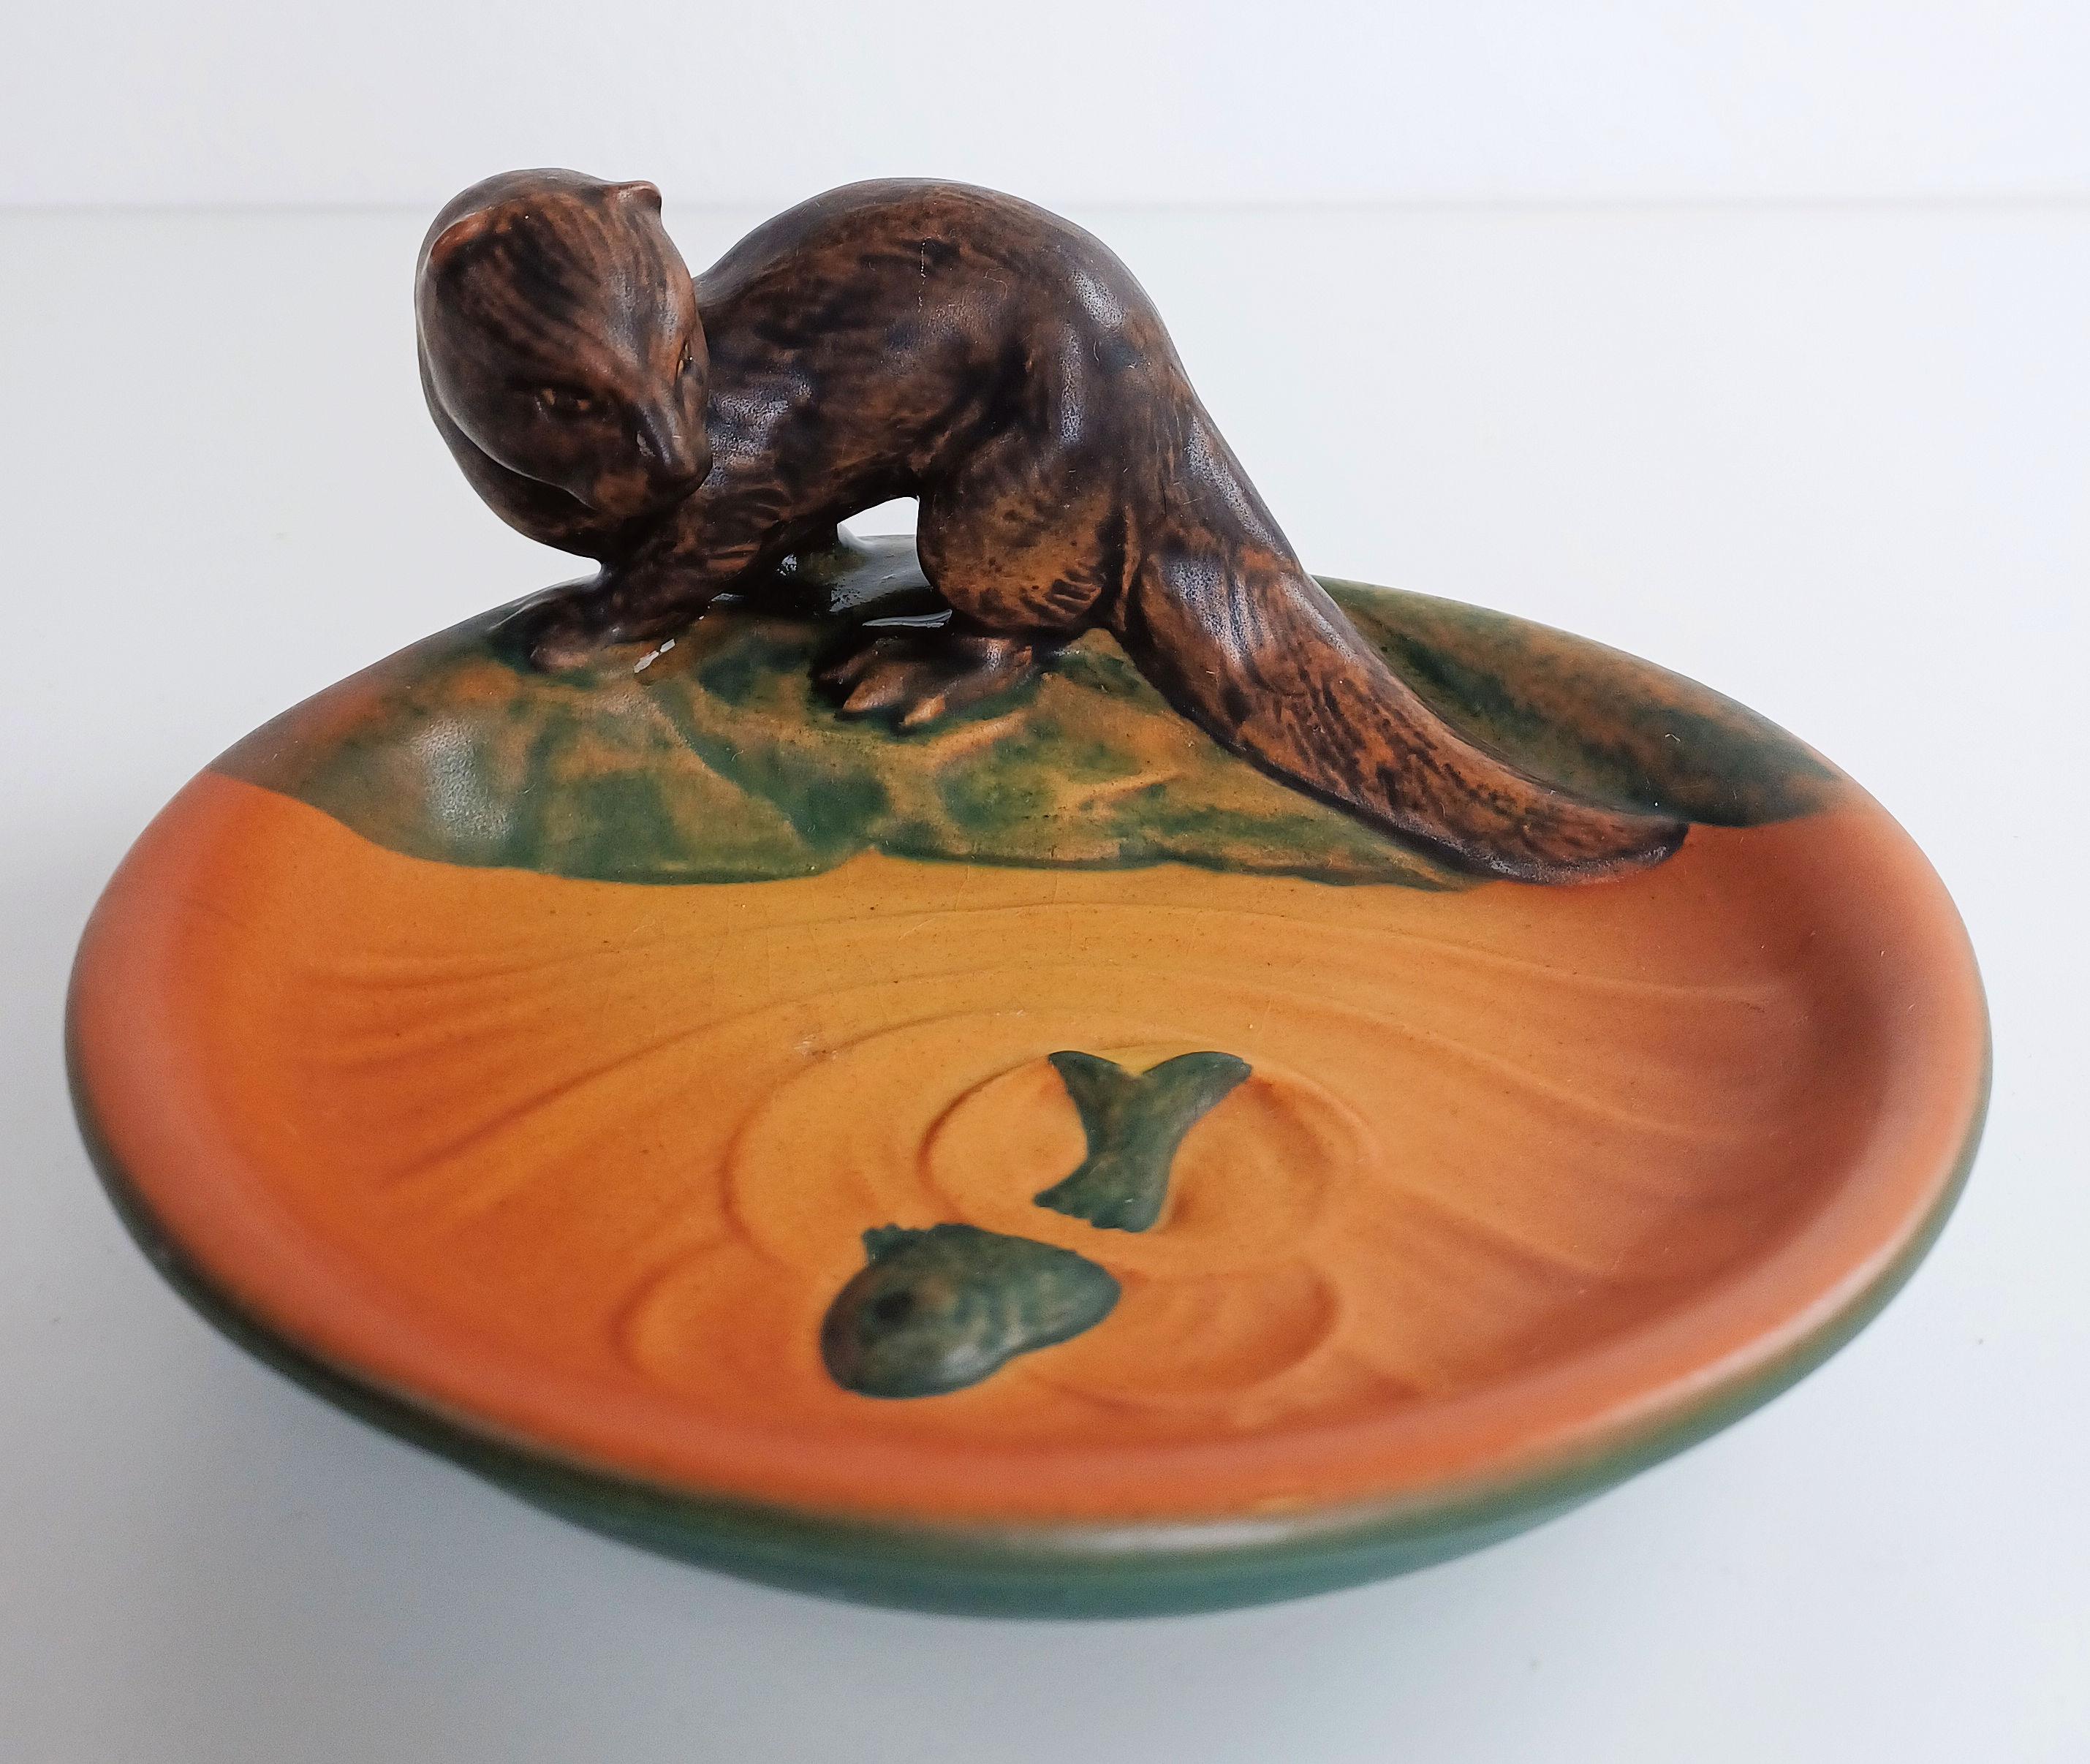 Danish hand-crafted Art Nouveau polecat ash tray / bowl by P. Ipsens Enke.

The Art Nuveau ash tray / bowl feature a lively polecat looking at a fish is in excellent condition.

Ipsens Enke (1843 - 1955) was a very successful manufacturer that